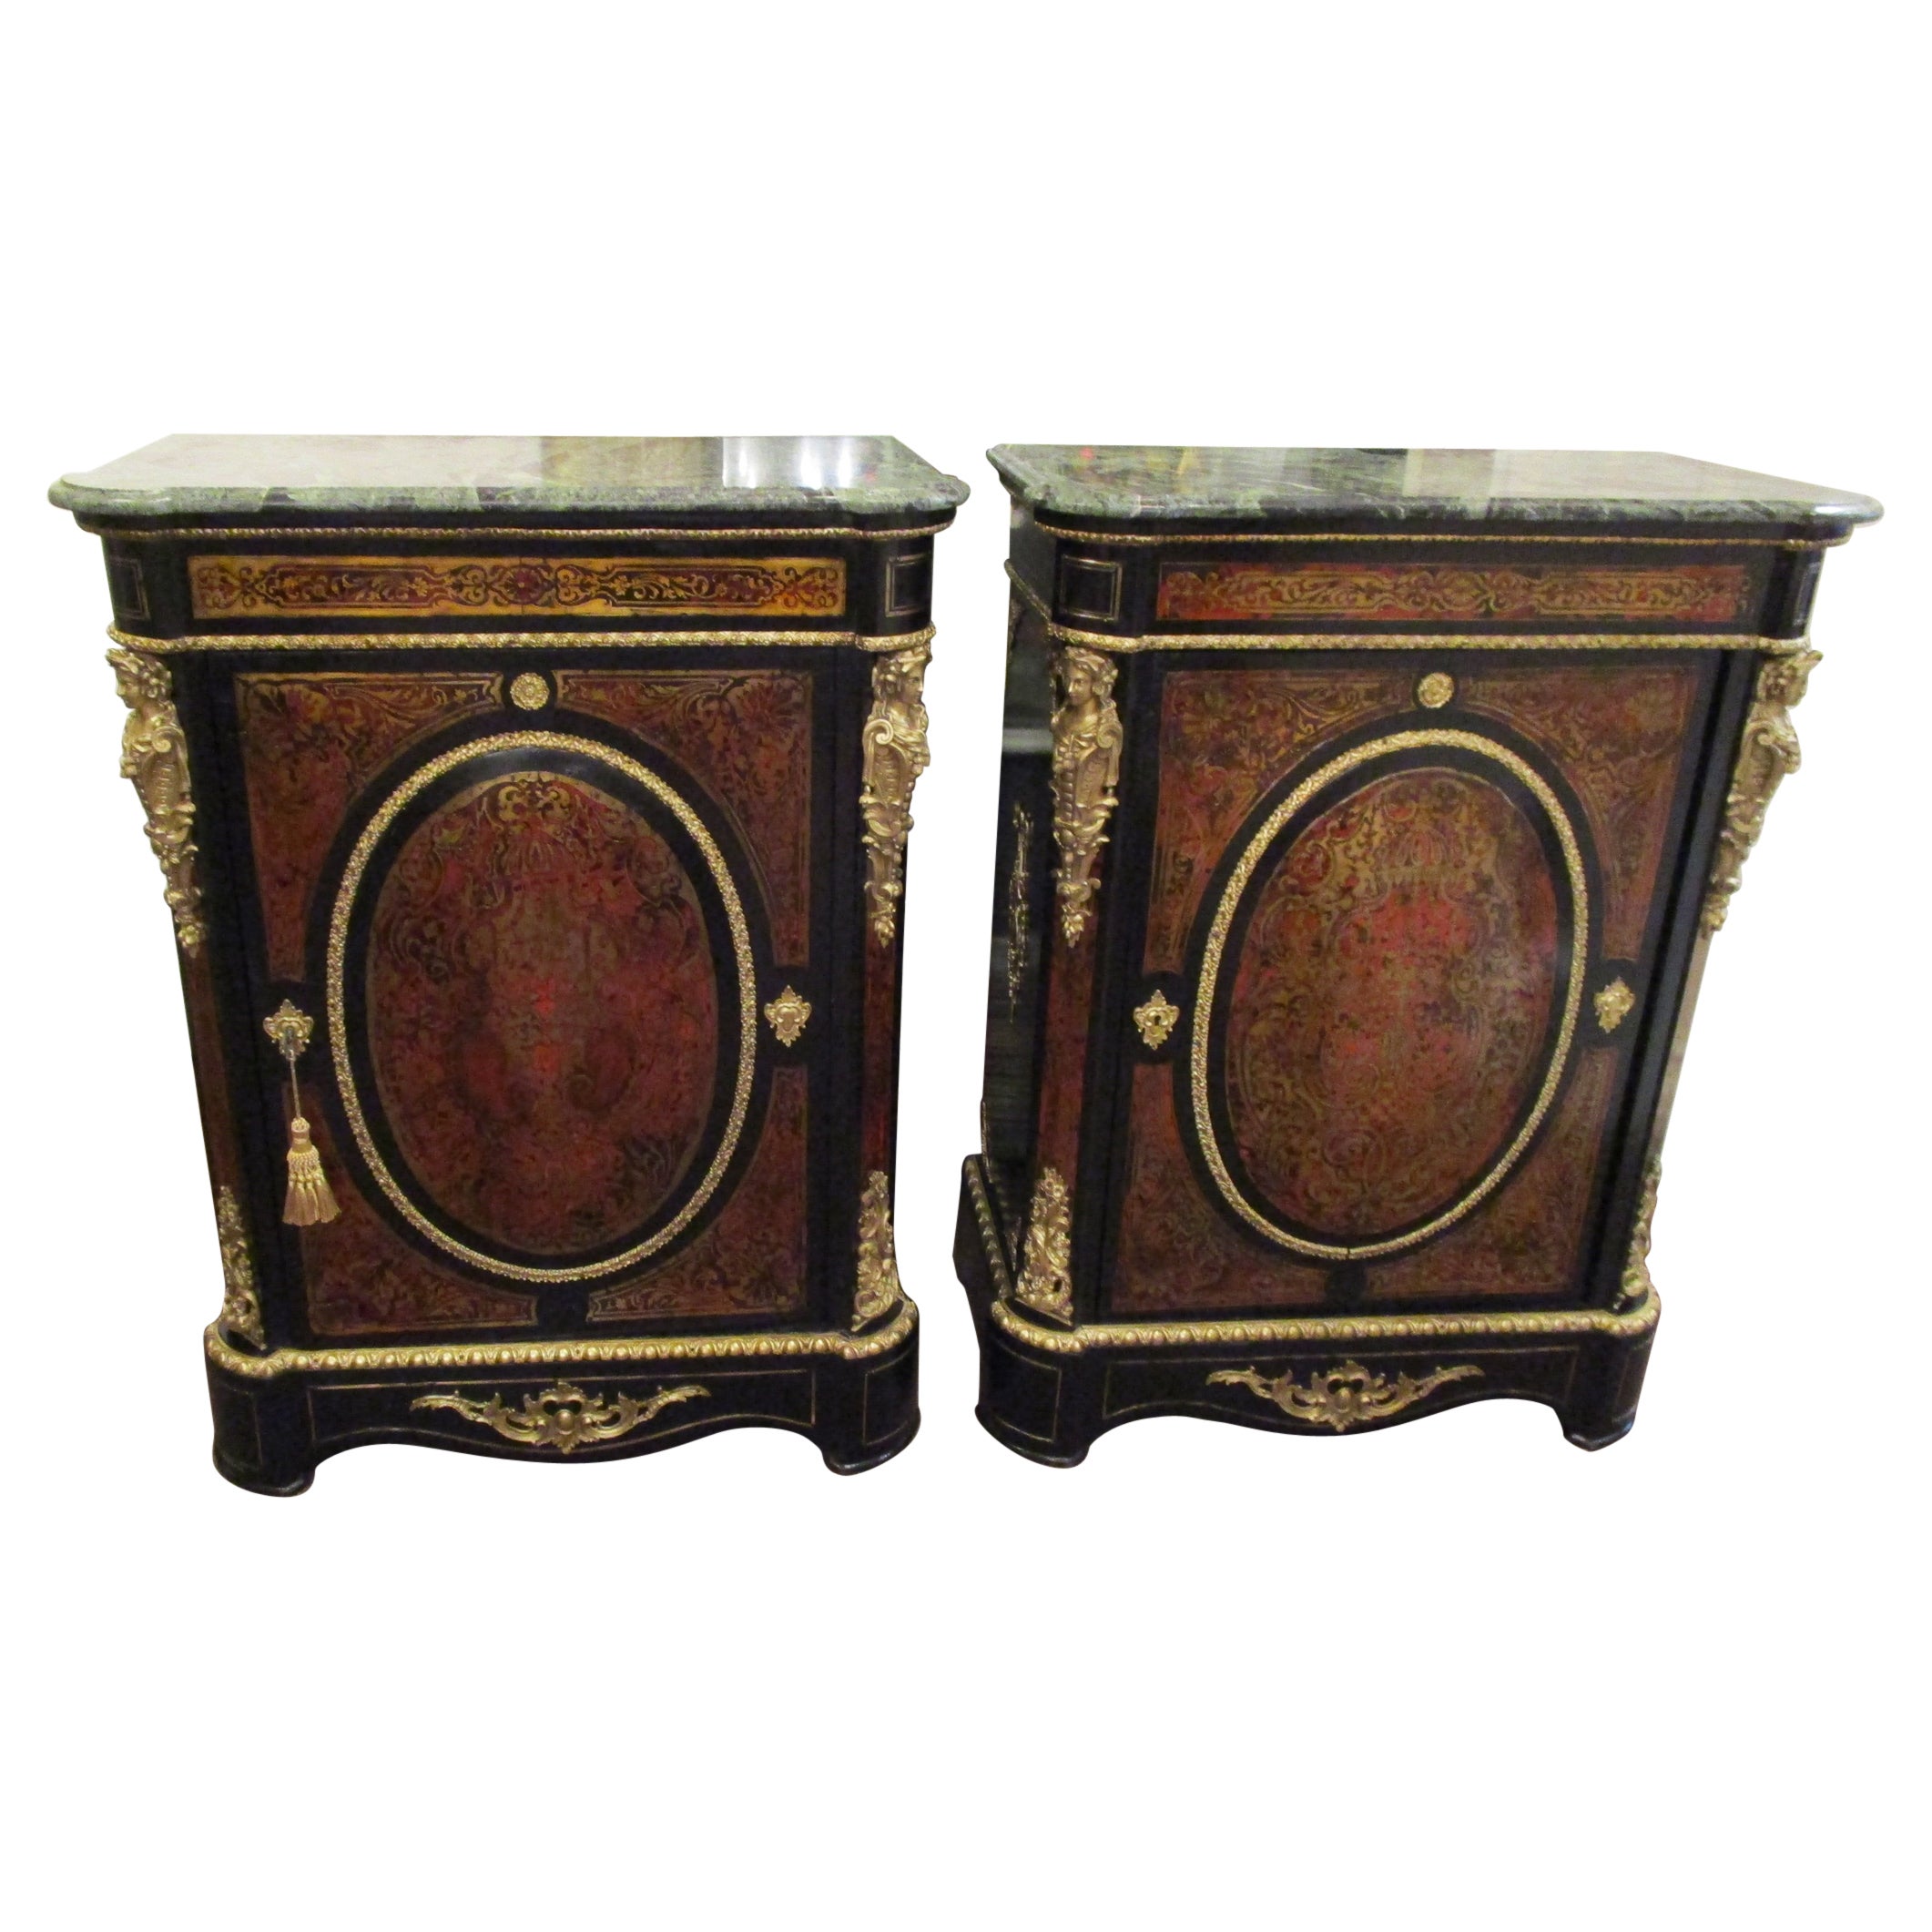 Near Pair of 19th Century French Boulle and Gilt Bronze Marble Top Cabinets